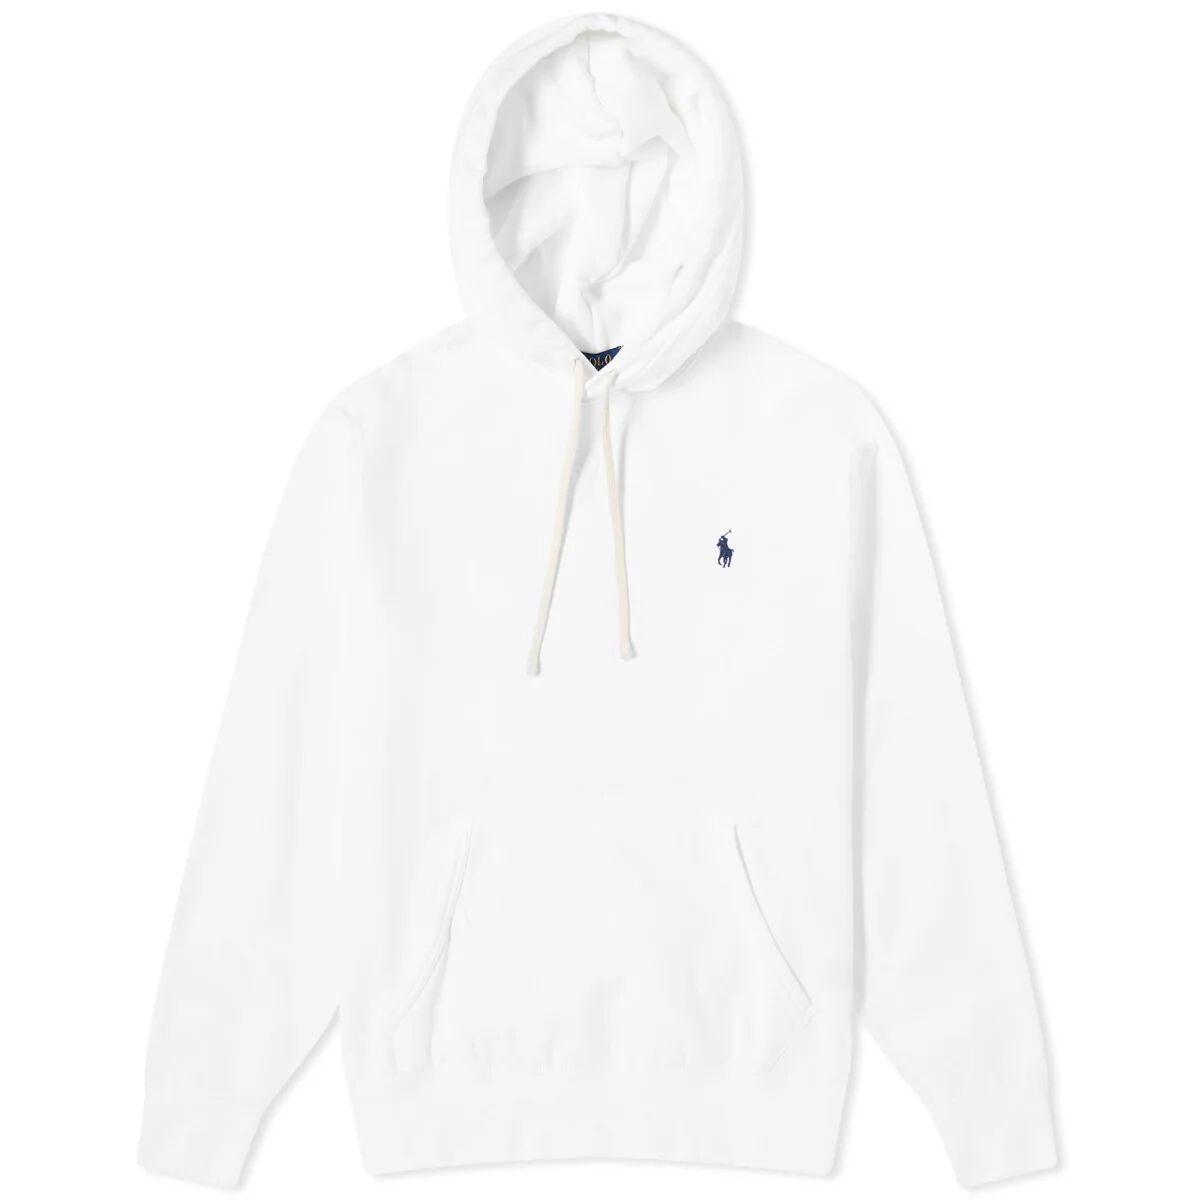 Polo Ralph Lauren Men's Classic Popover Hoody in White, Size Large